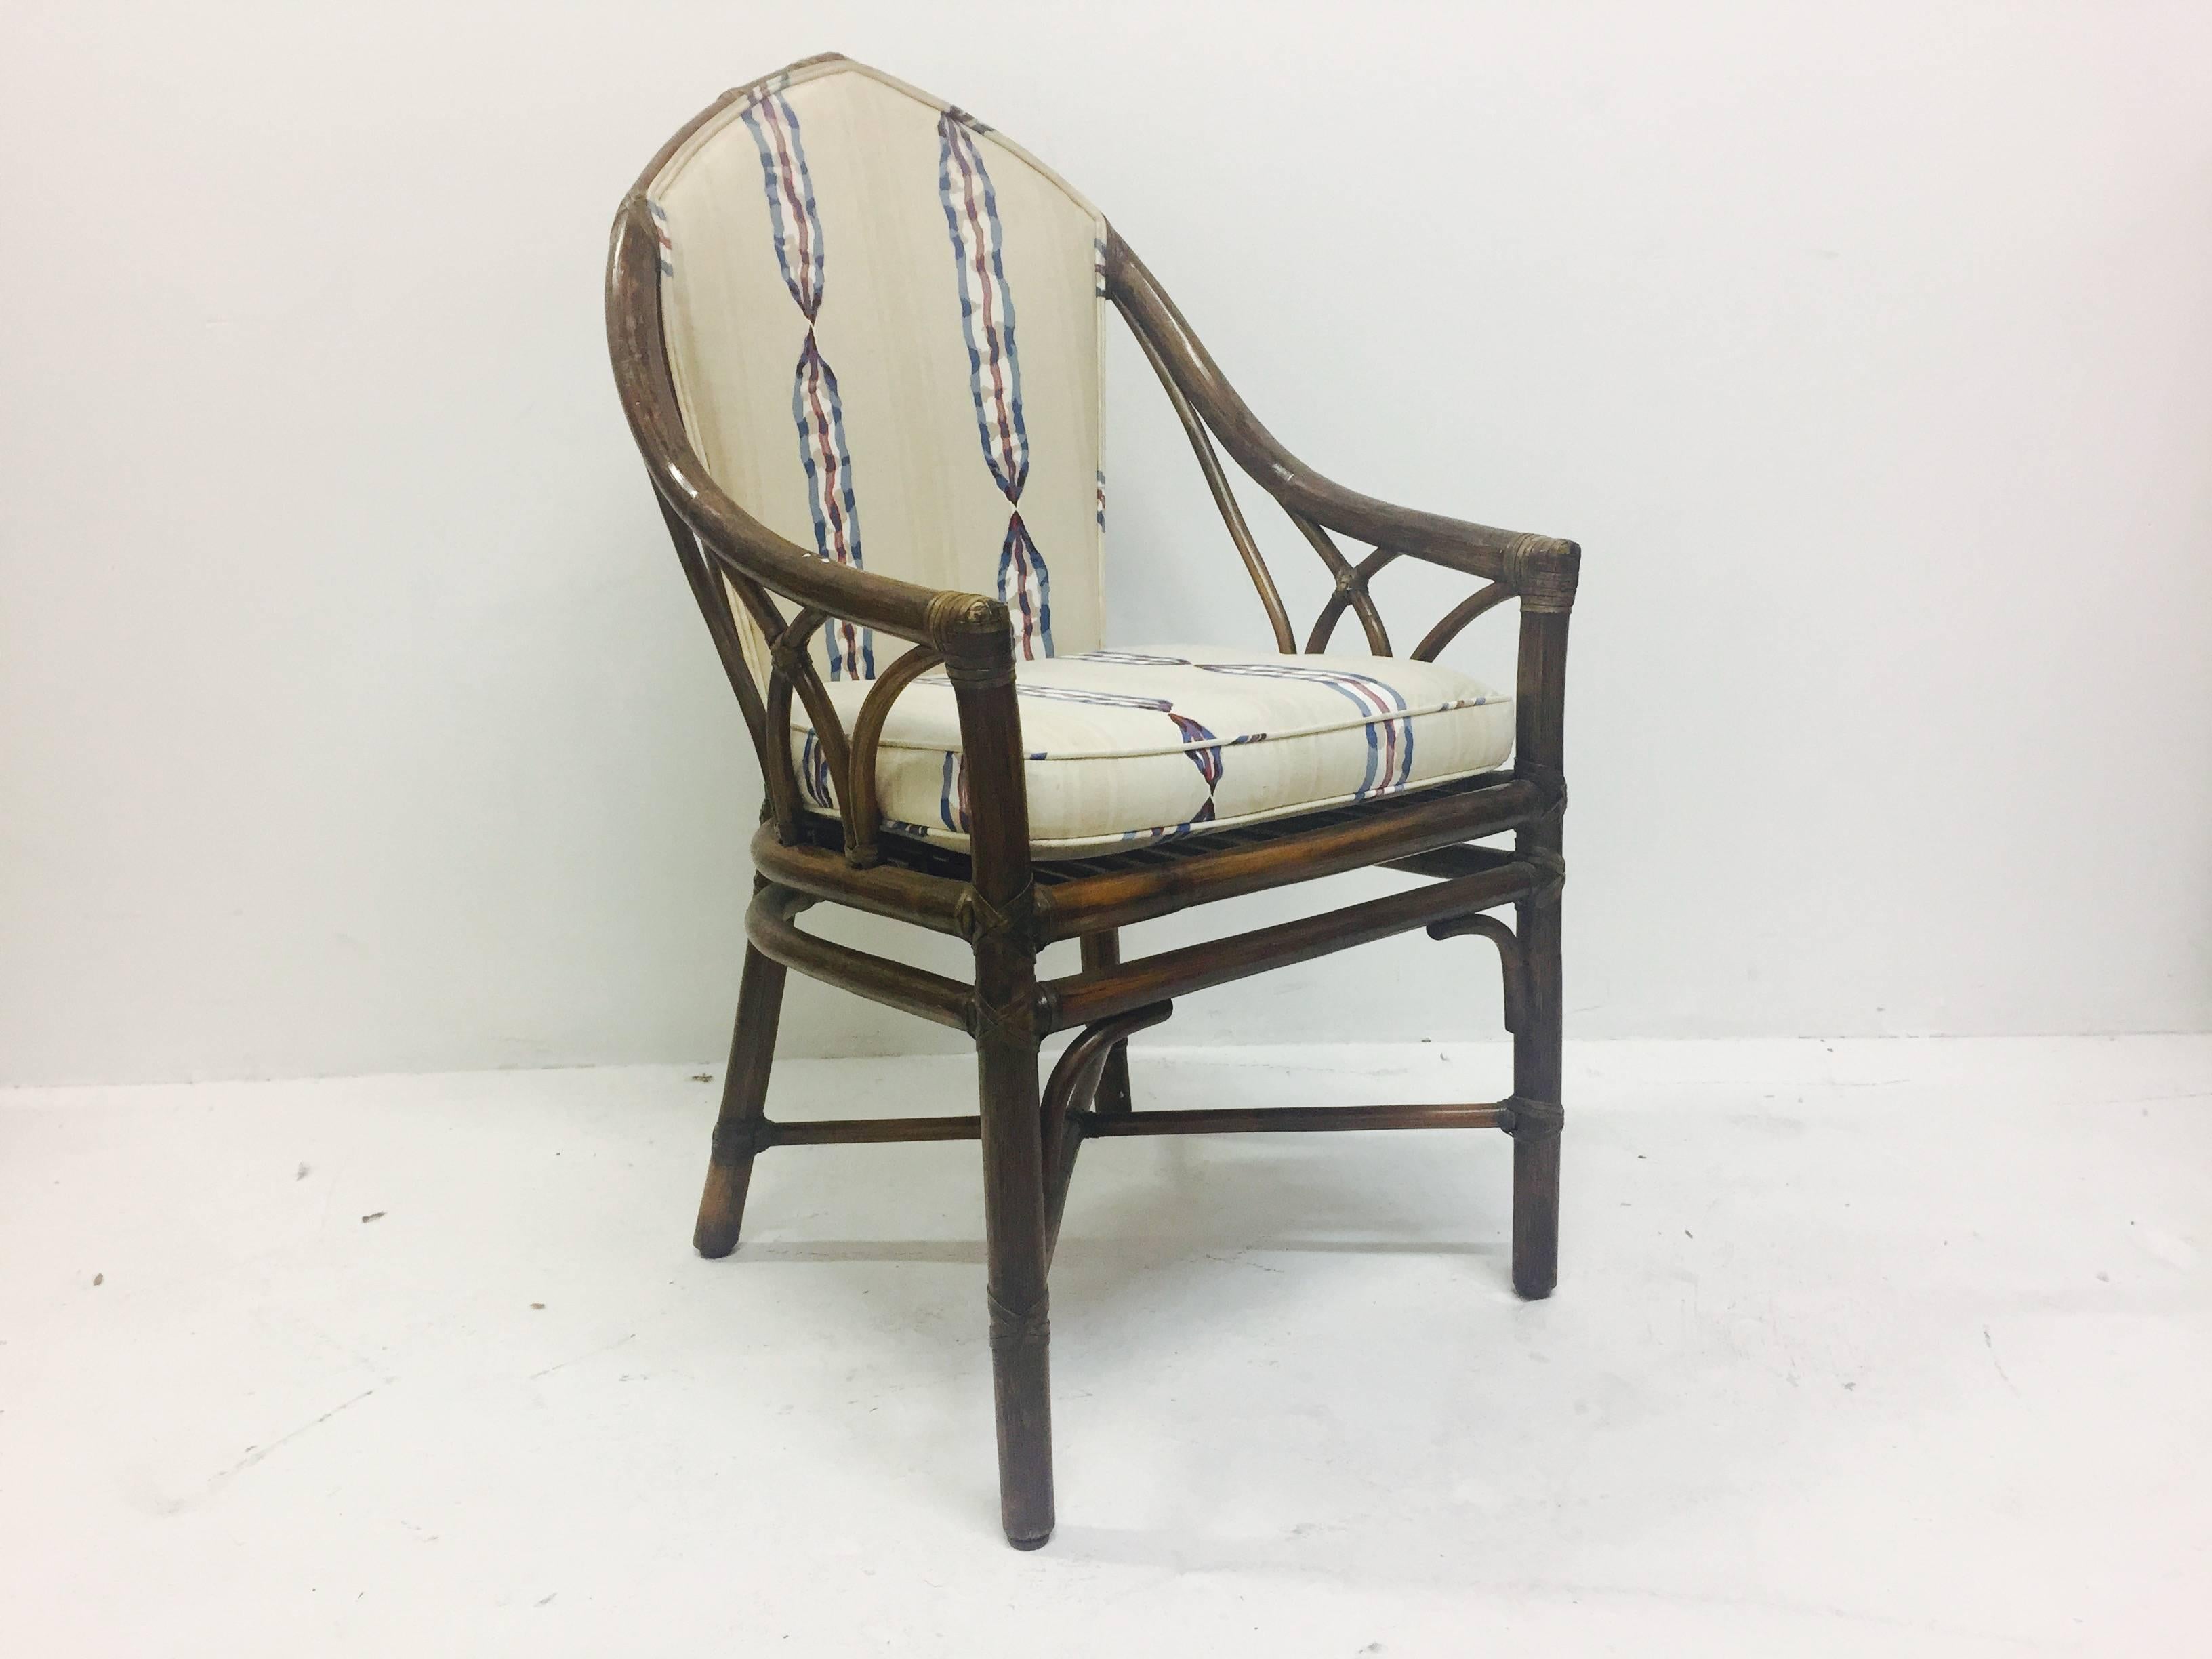 Set of six Gothic style rattan chairs by McGuire. New upholstery and refinishing is recommended. There is some loss with leather strapping around armrest.

dimensions: 22